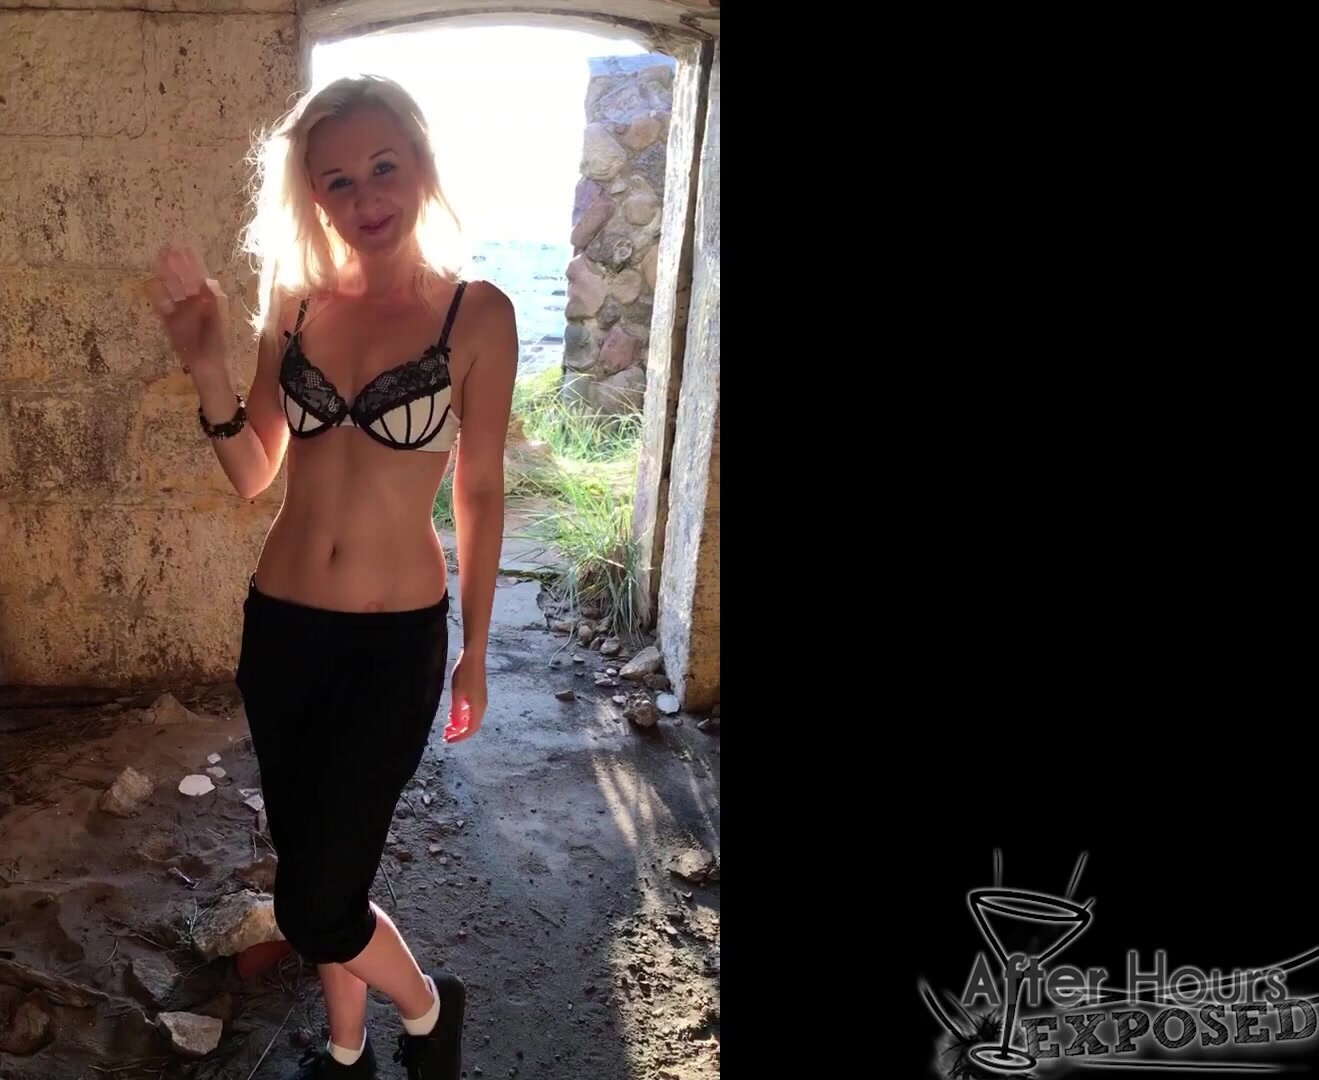 AfterHoursExposed - Public Blowjob from Ranta in Some Beach Fortress Ruins